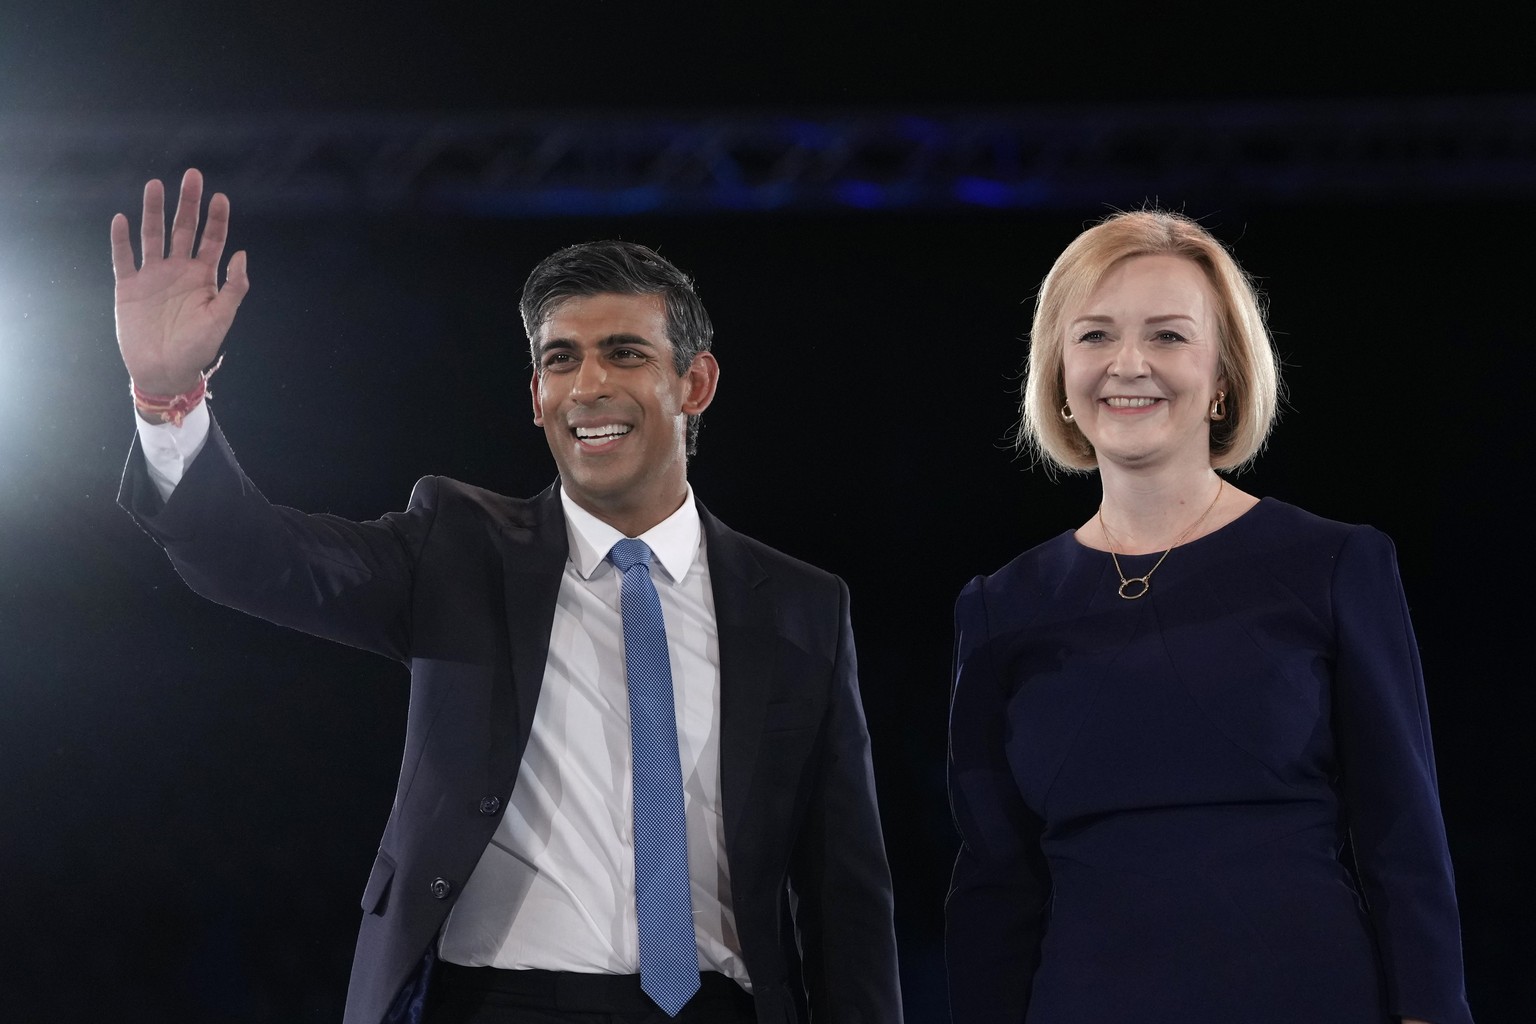 FILE - Liz Truss, right, and Rishi Sunak on stage after a Conservative leadership election hustings at Wembley Arena in London, Wednesday, Aug. 31, 2022. After weeks of waiting, Britain will finally l ...